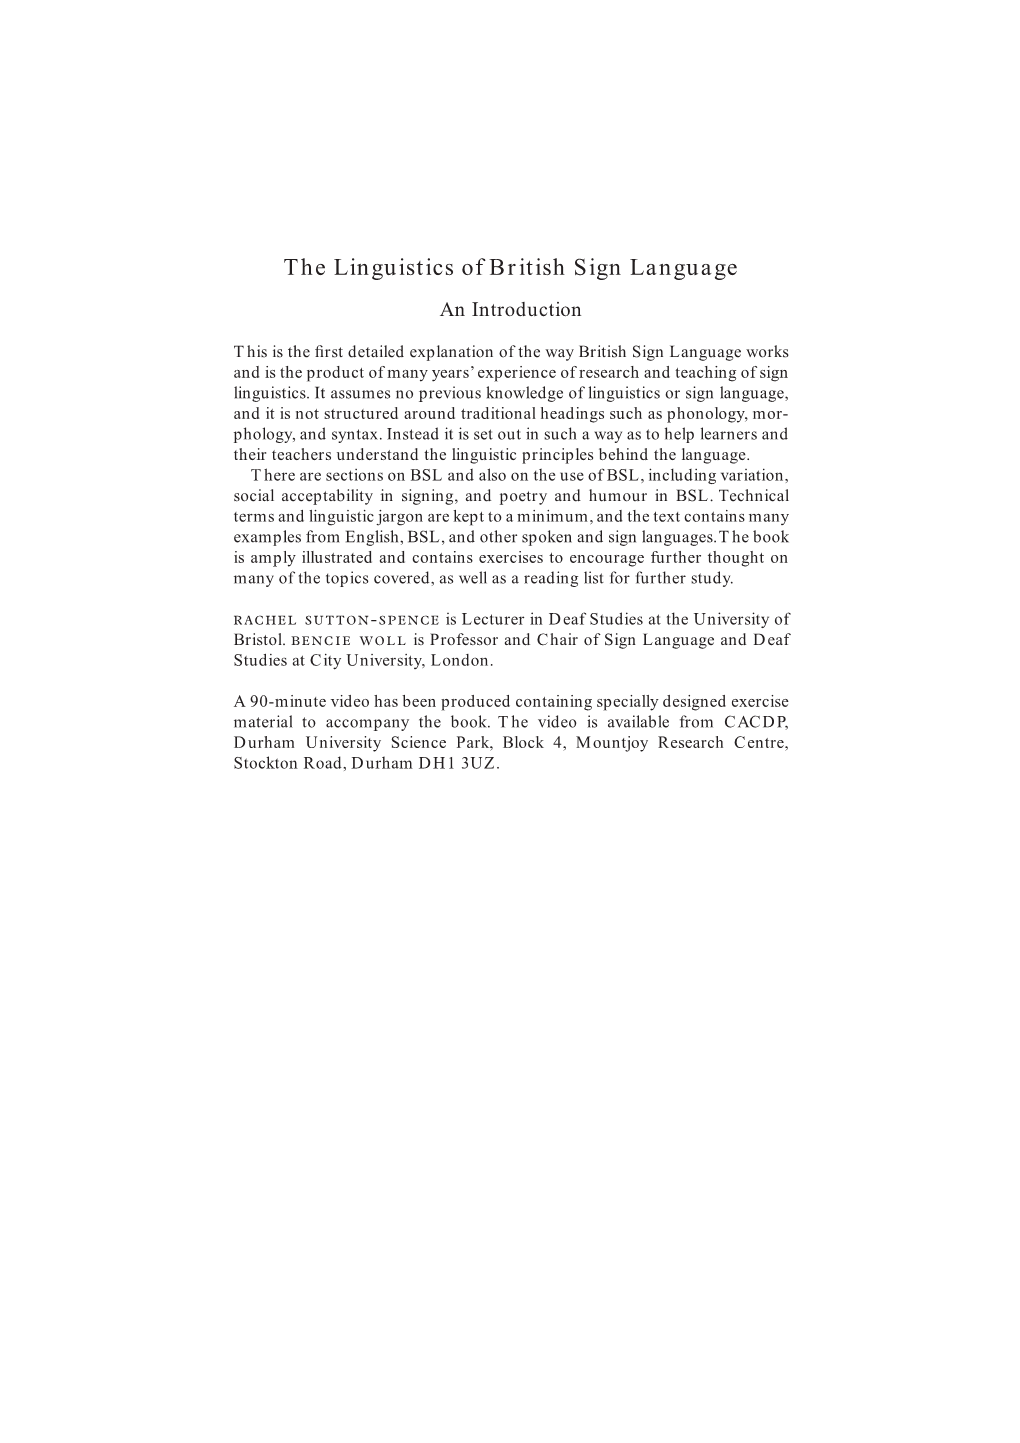 The Linguistics of British Sign Language an Introduction